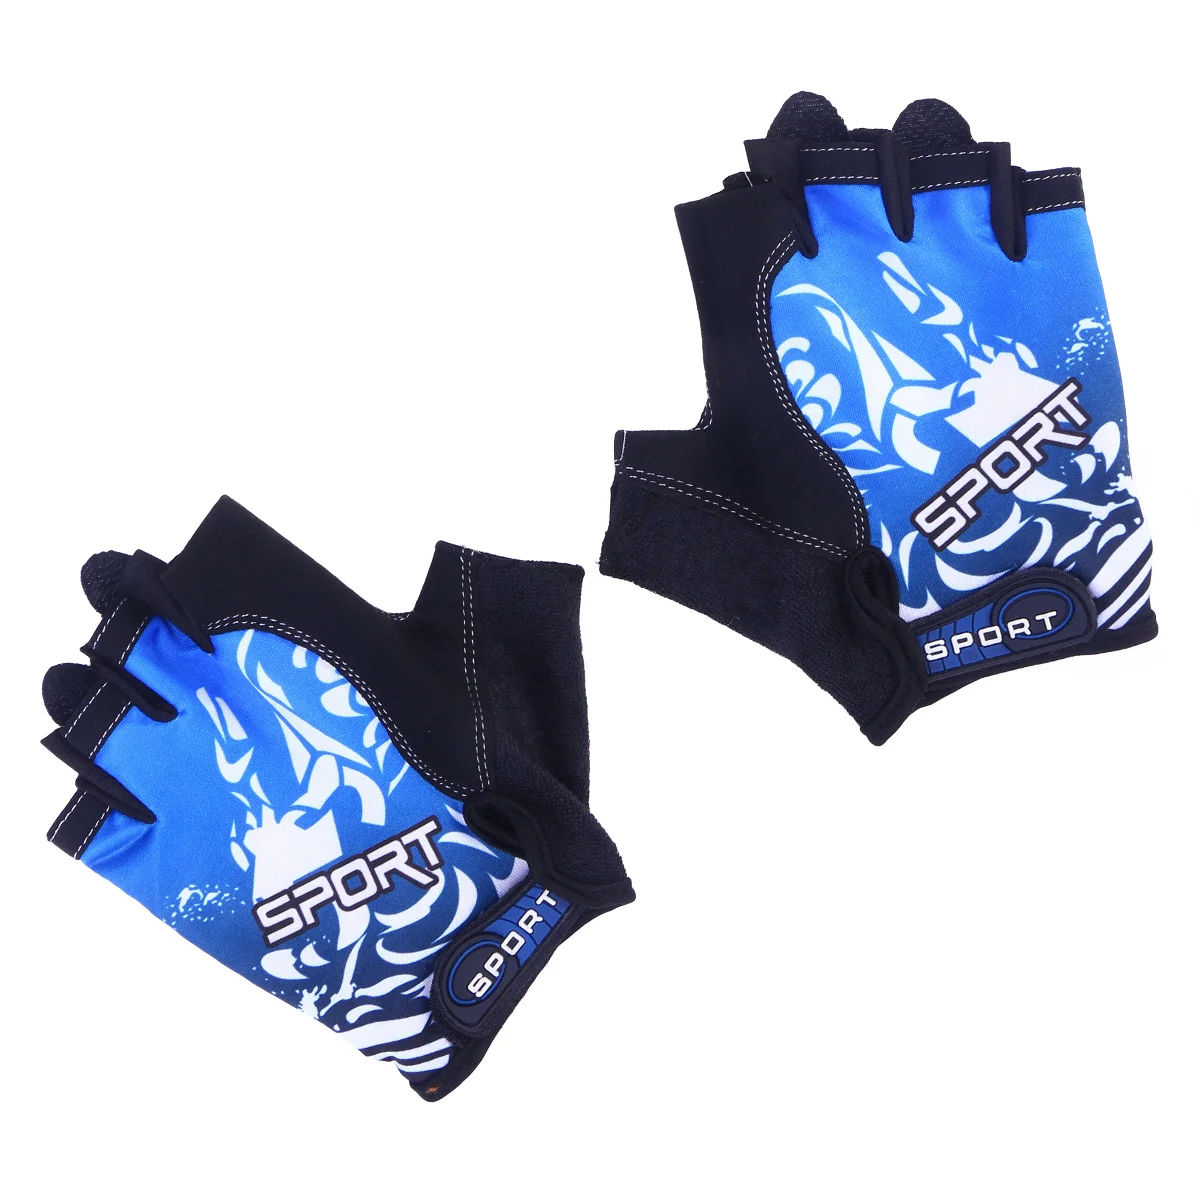 1 Pair Outdoor Sports Half Finger Gloves Non-Slip Breathable Workout Gloves for Cycling Climbing Fishing Riding Size M (Blue) 1 pair half finger gloves breaking wind anti slip bicycle mittens sports for outdoor cycling riding bike gloves half finger